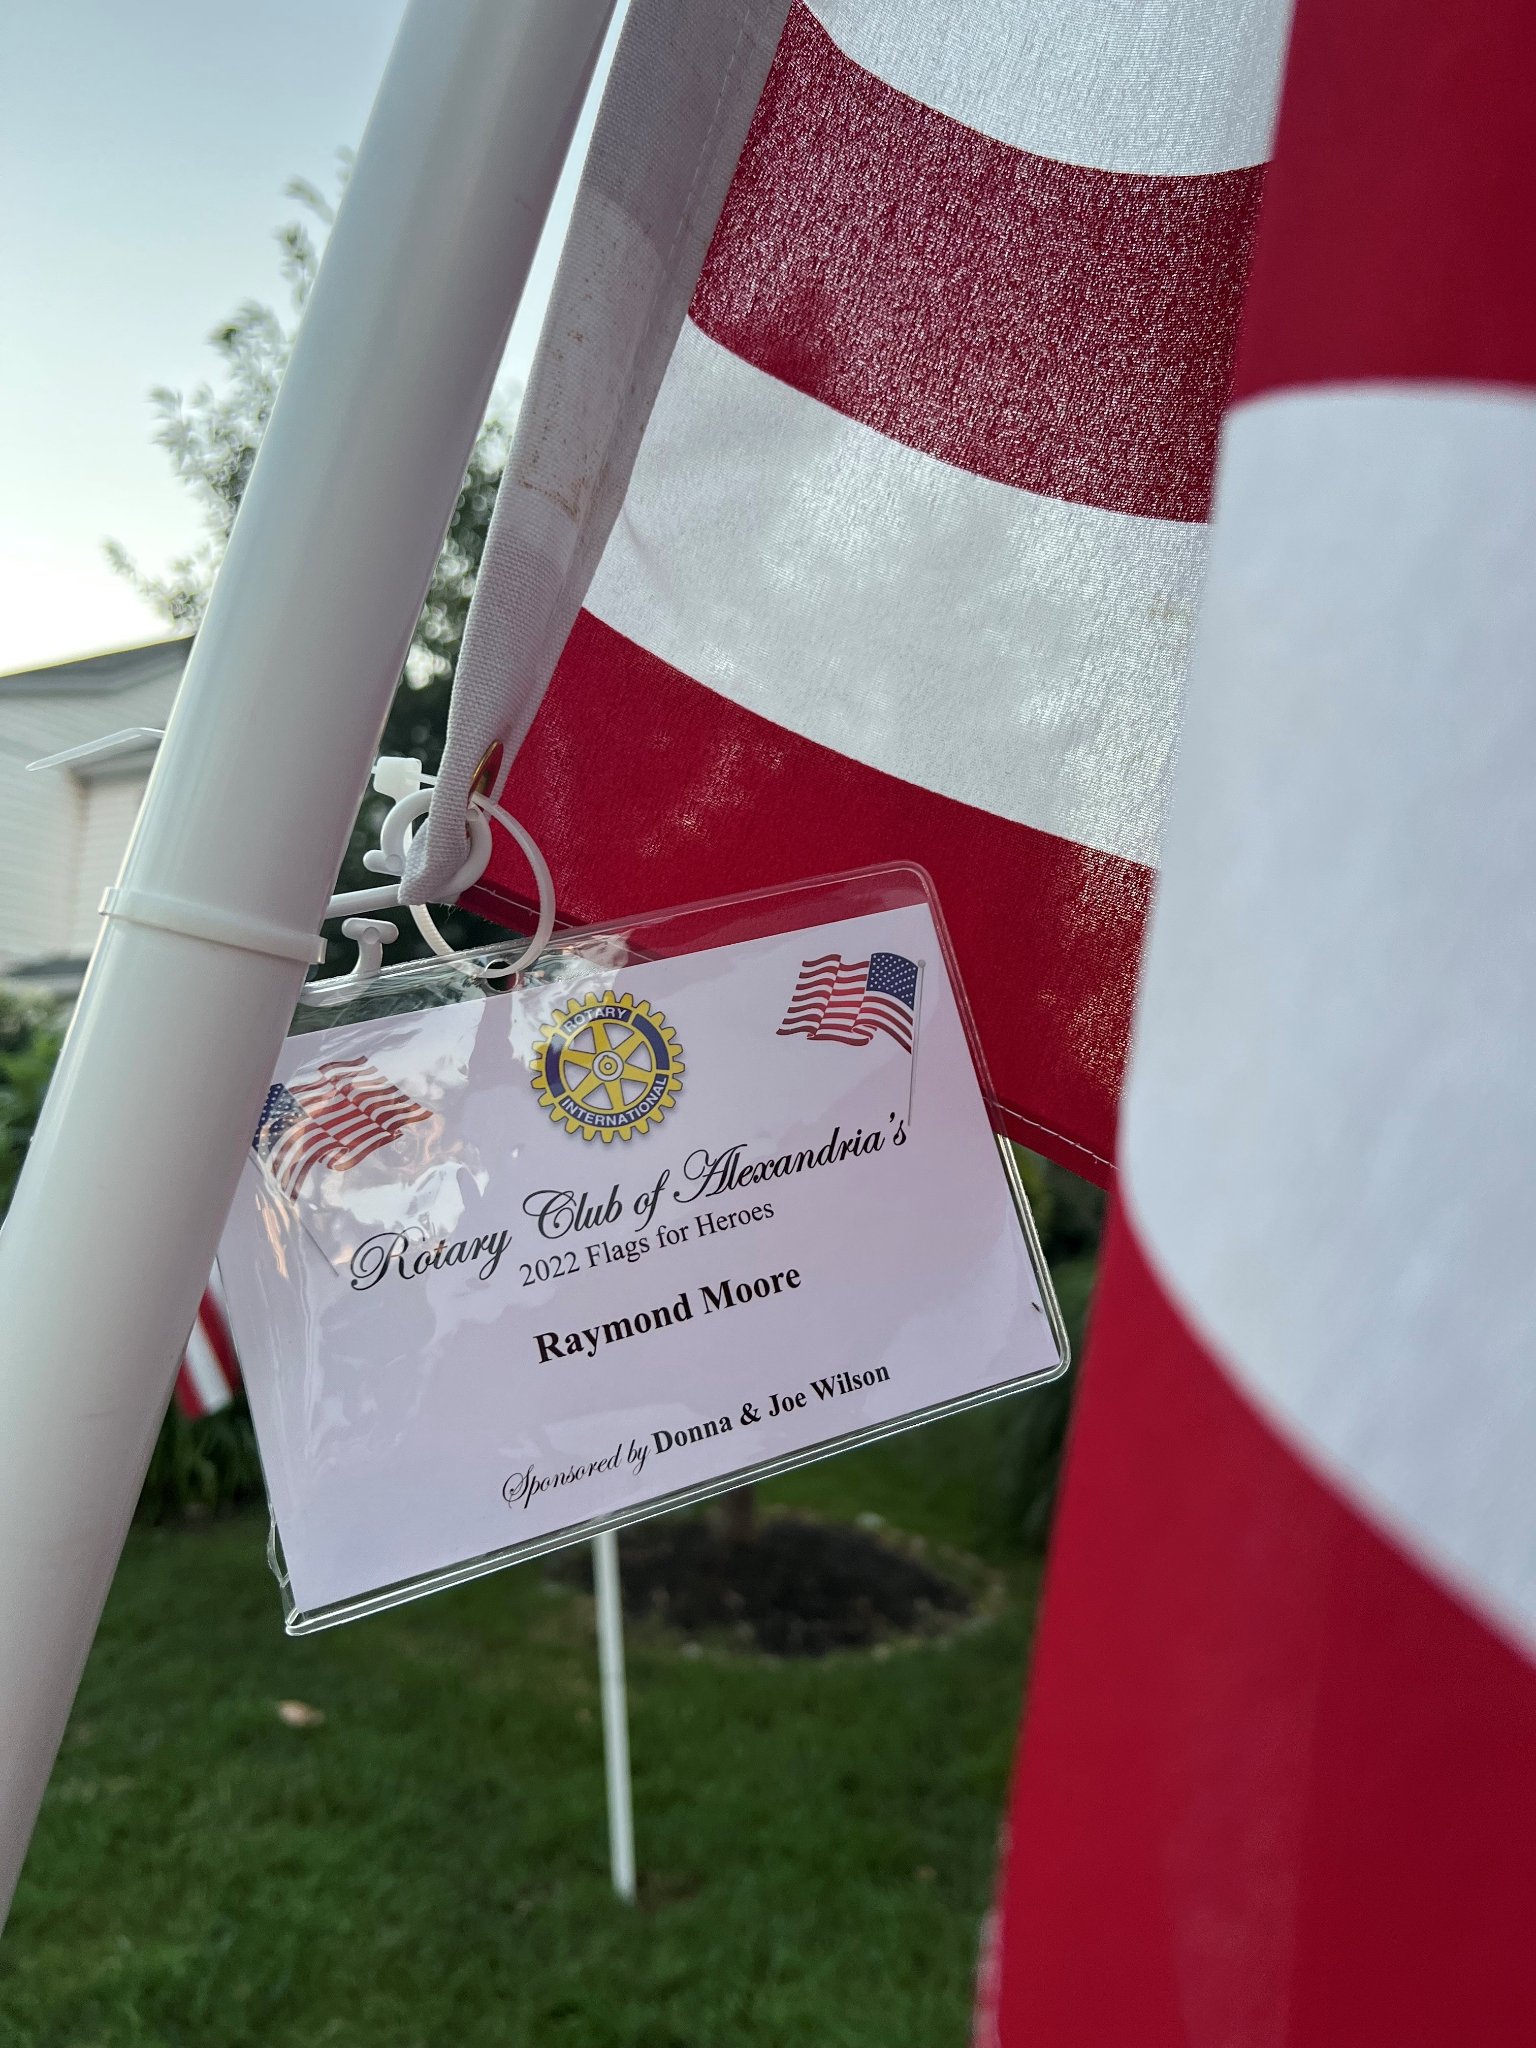 Commemorative plaque attached to flagpole of American flag in Flags for Heroes event.